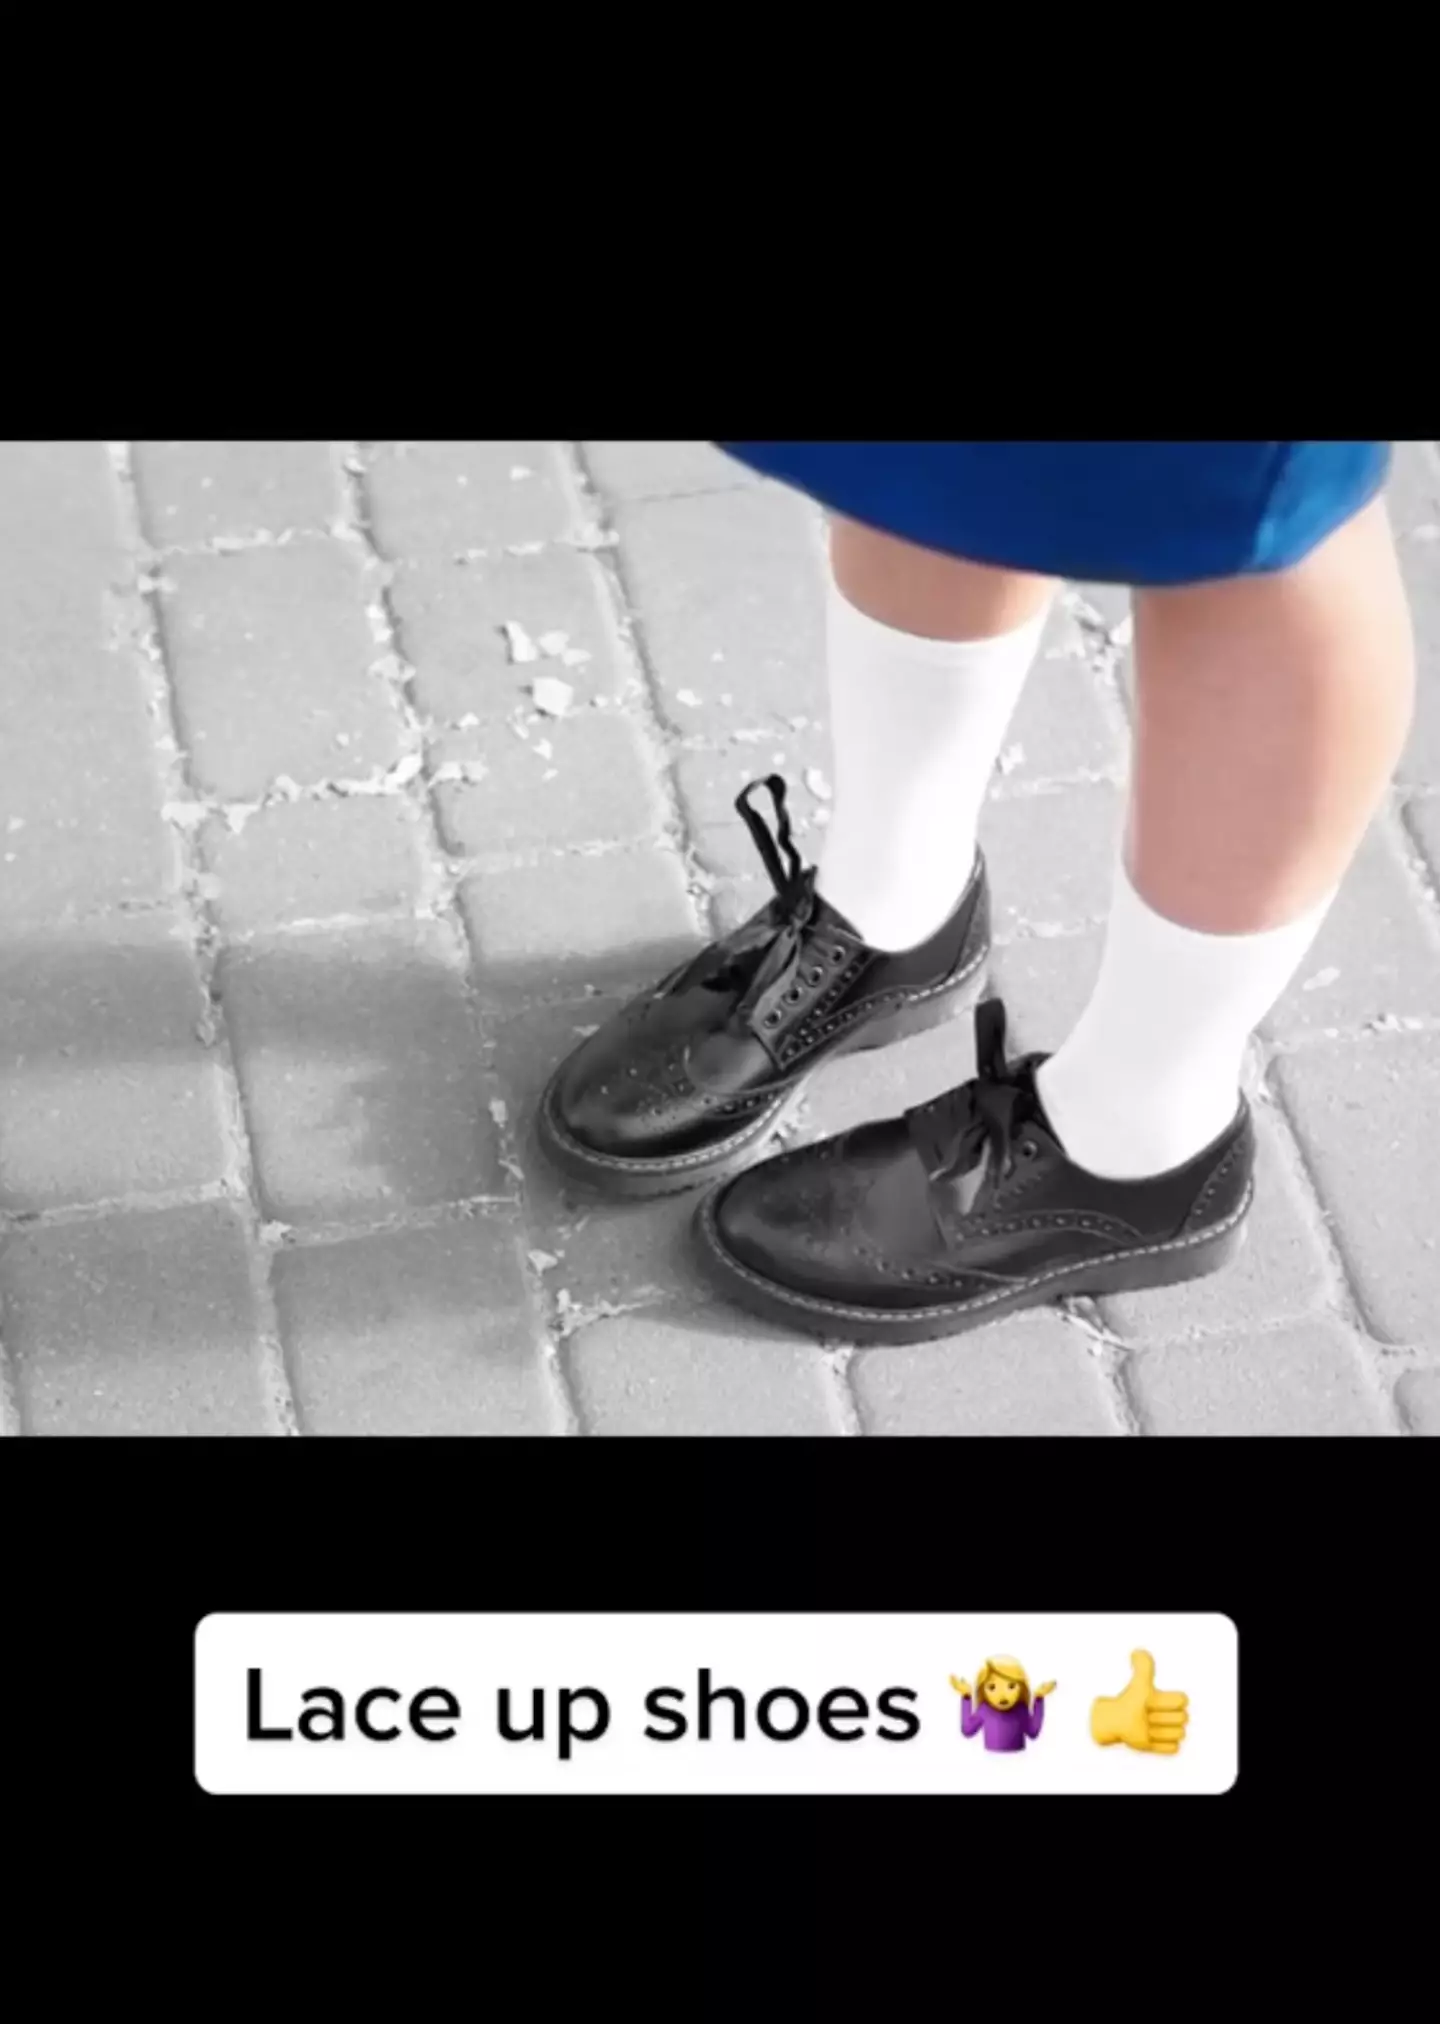 Lace-up shoes were second on the teacher's list of things she hates parents buy their kids.